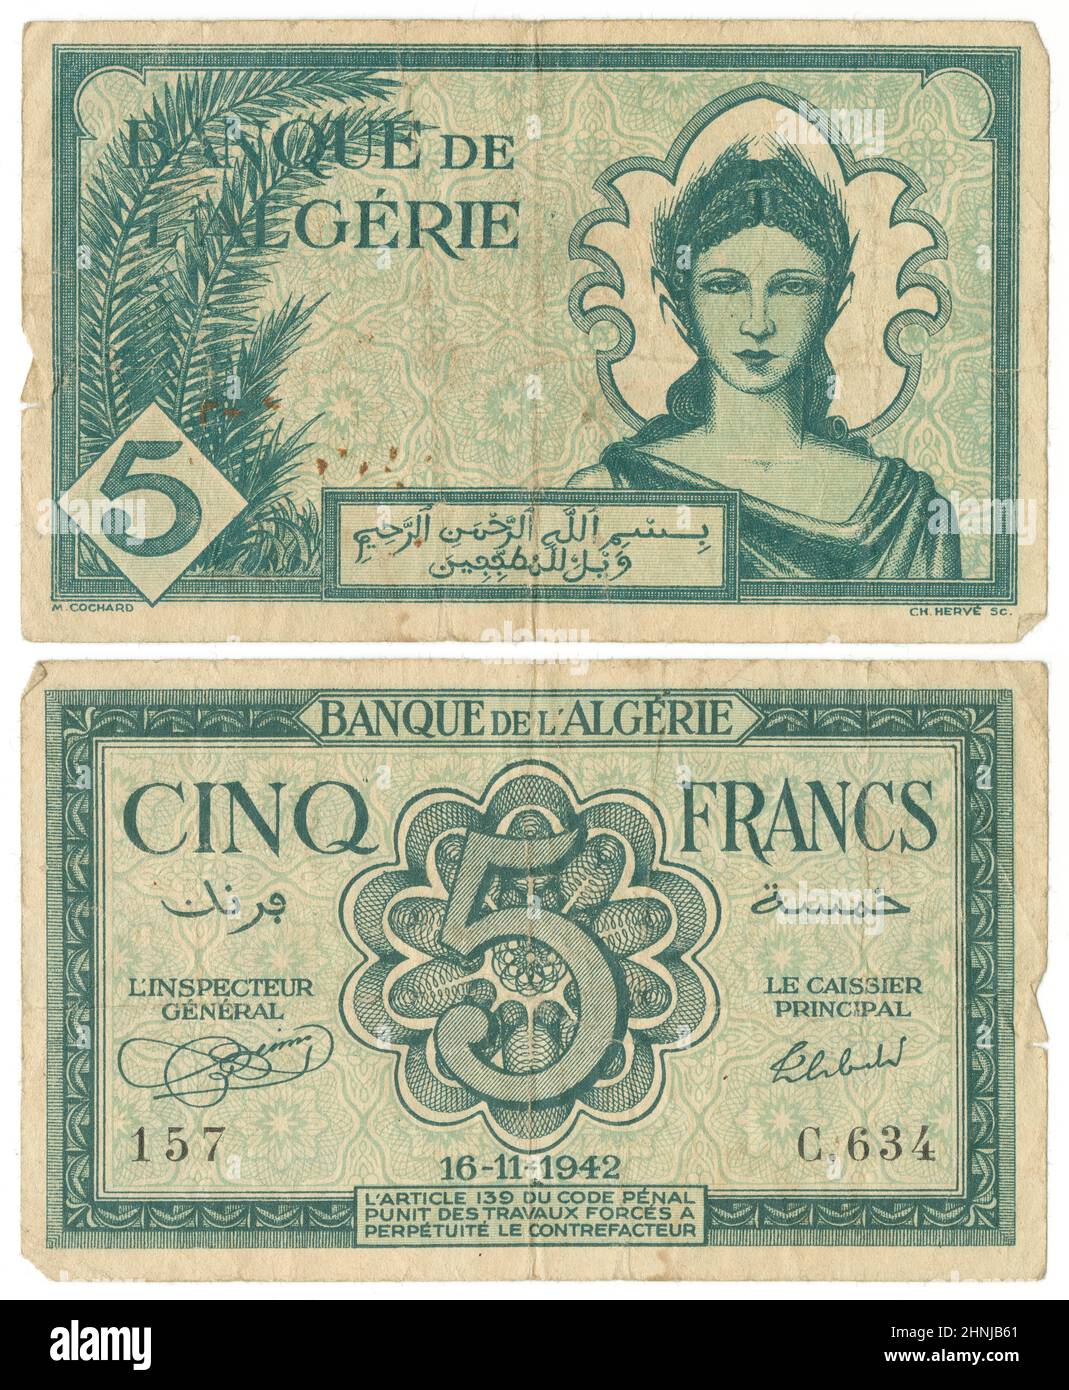 1942, Five Francs note, Algeria, obverse and reverse. Actual size: 97mm x 59mm. Stock Photo